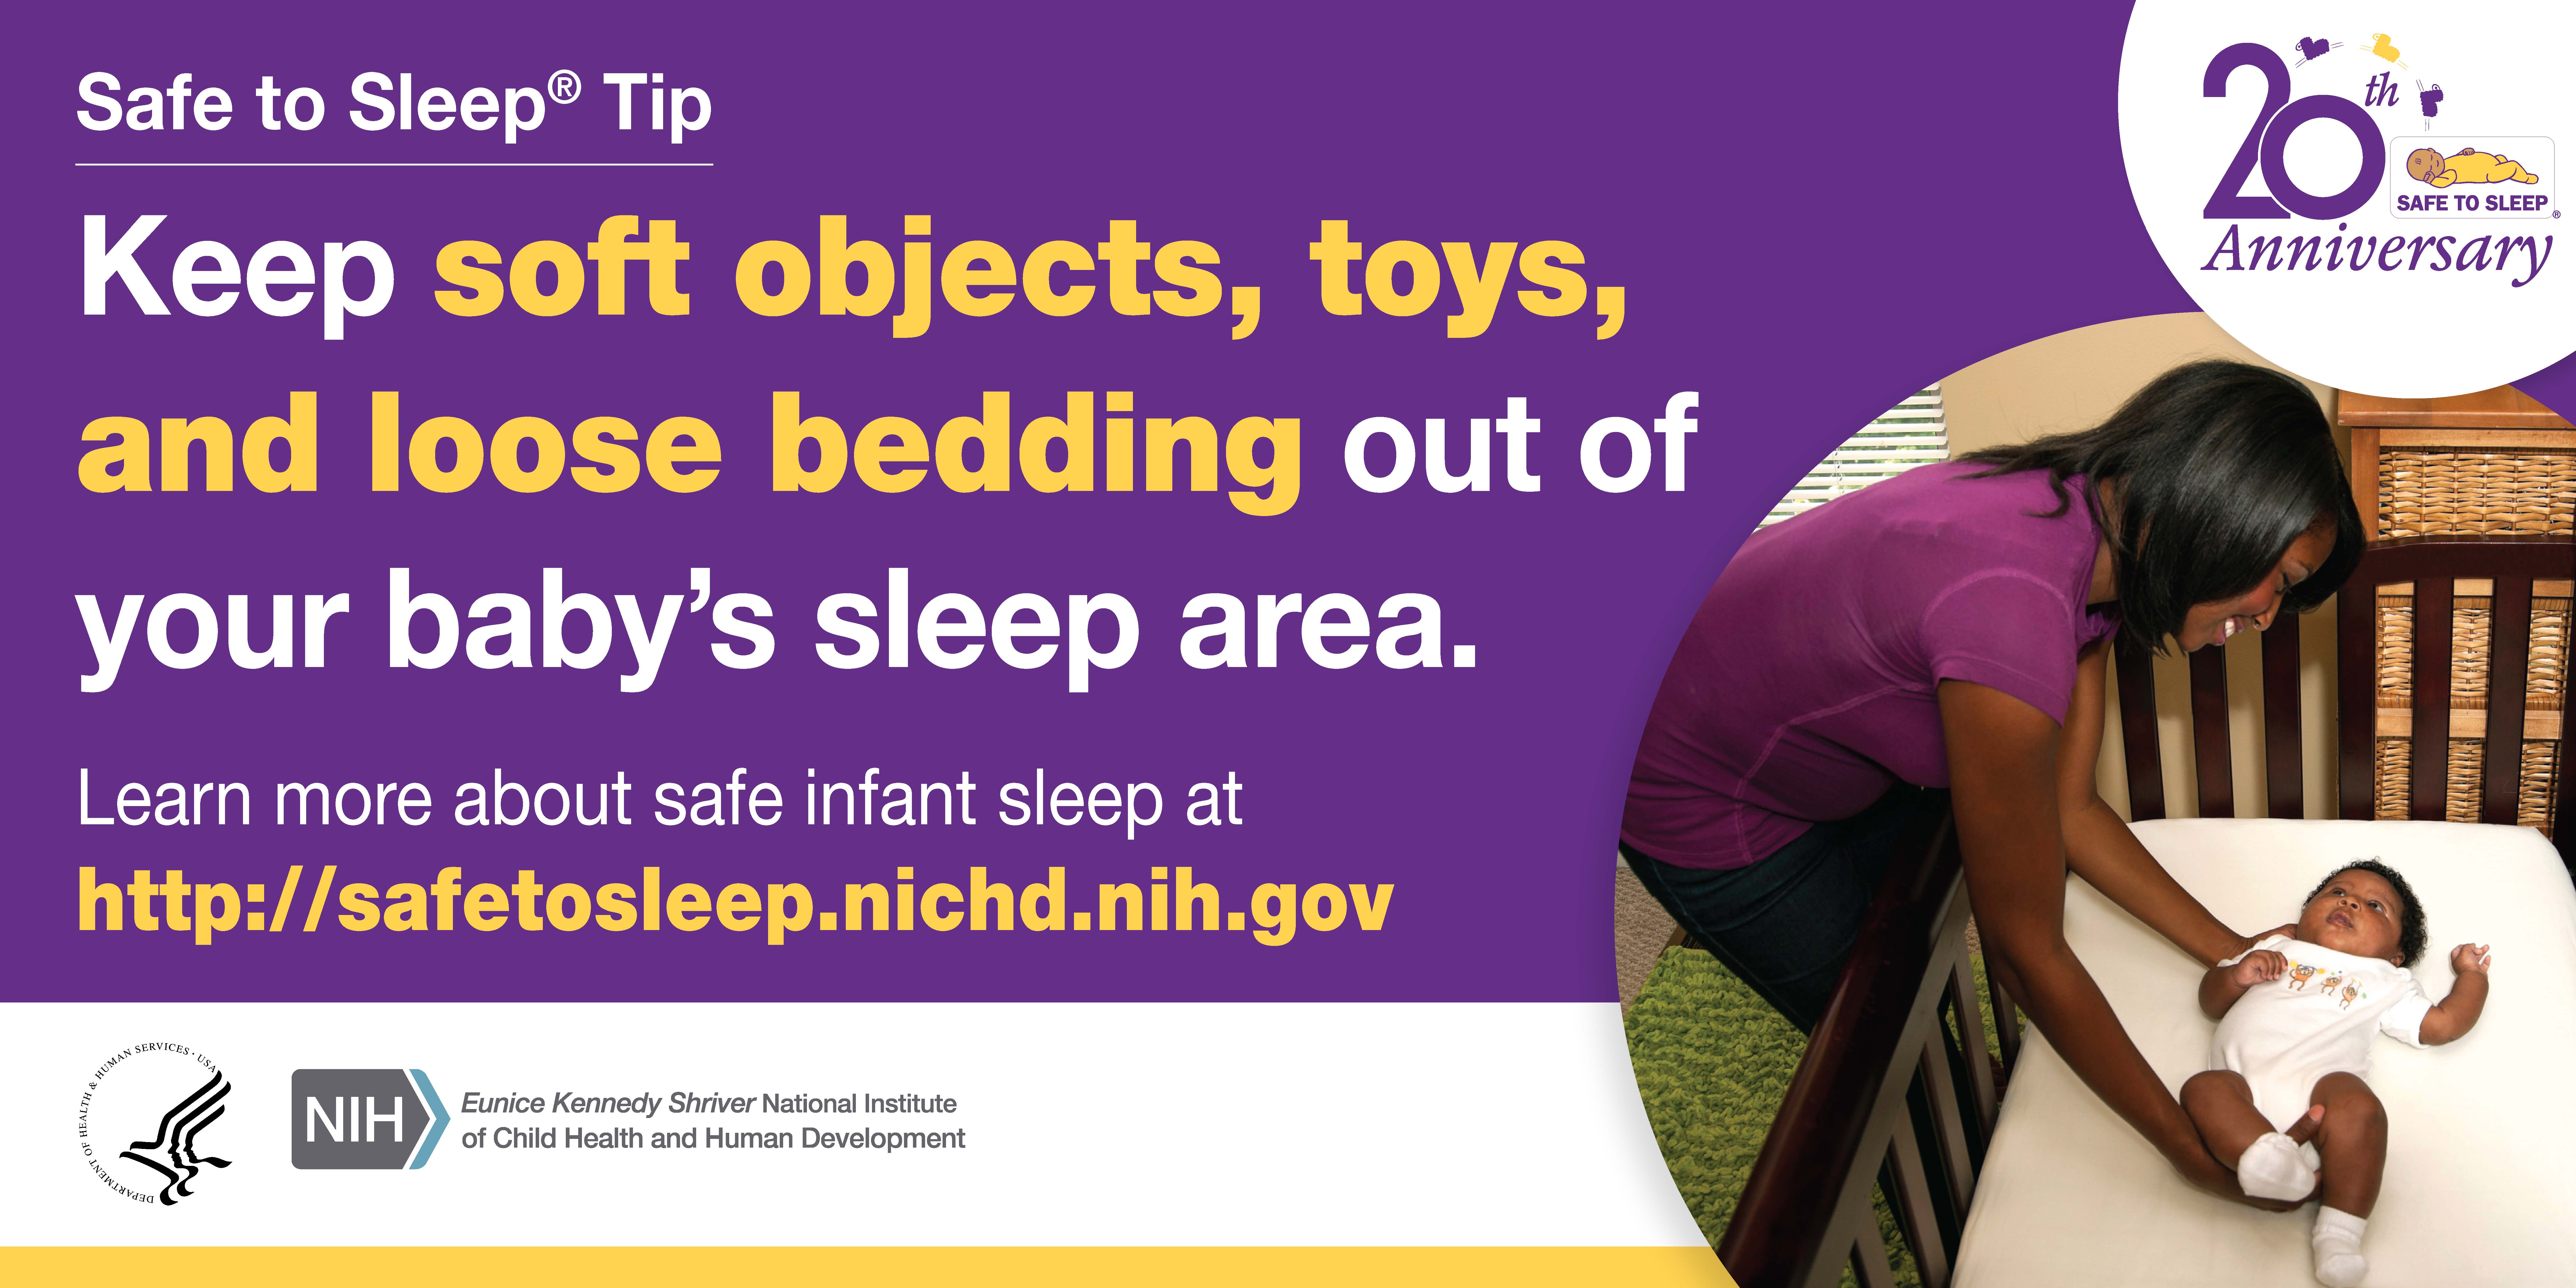 Keep soft objects, toys, and loose bedding out of your baby's sleep area.